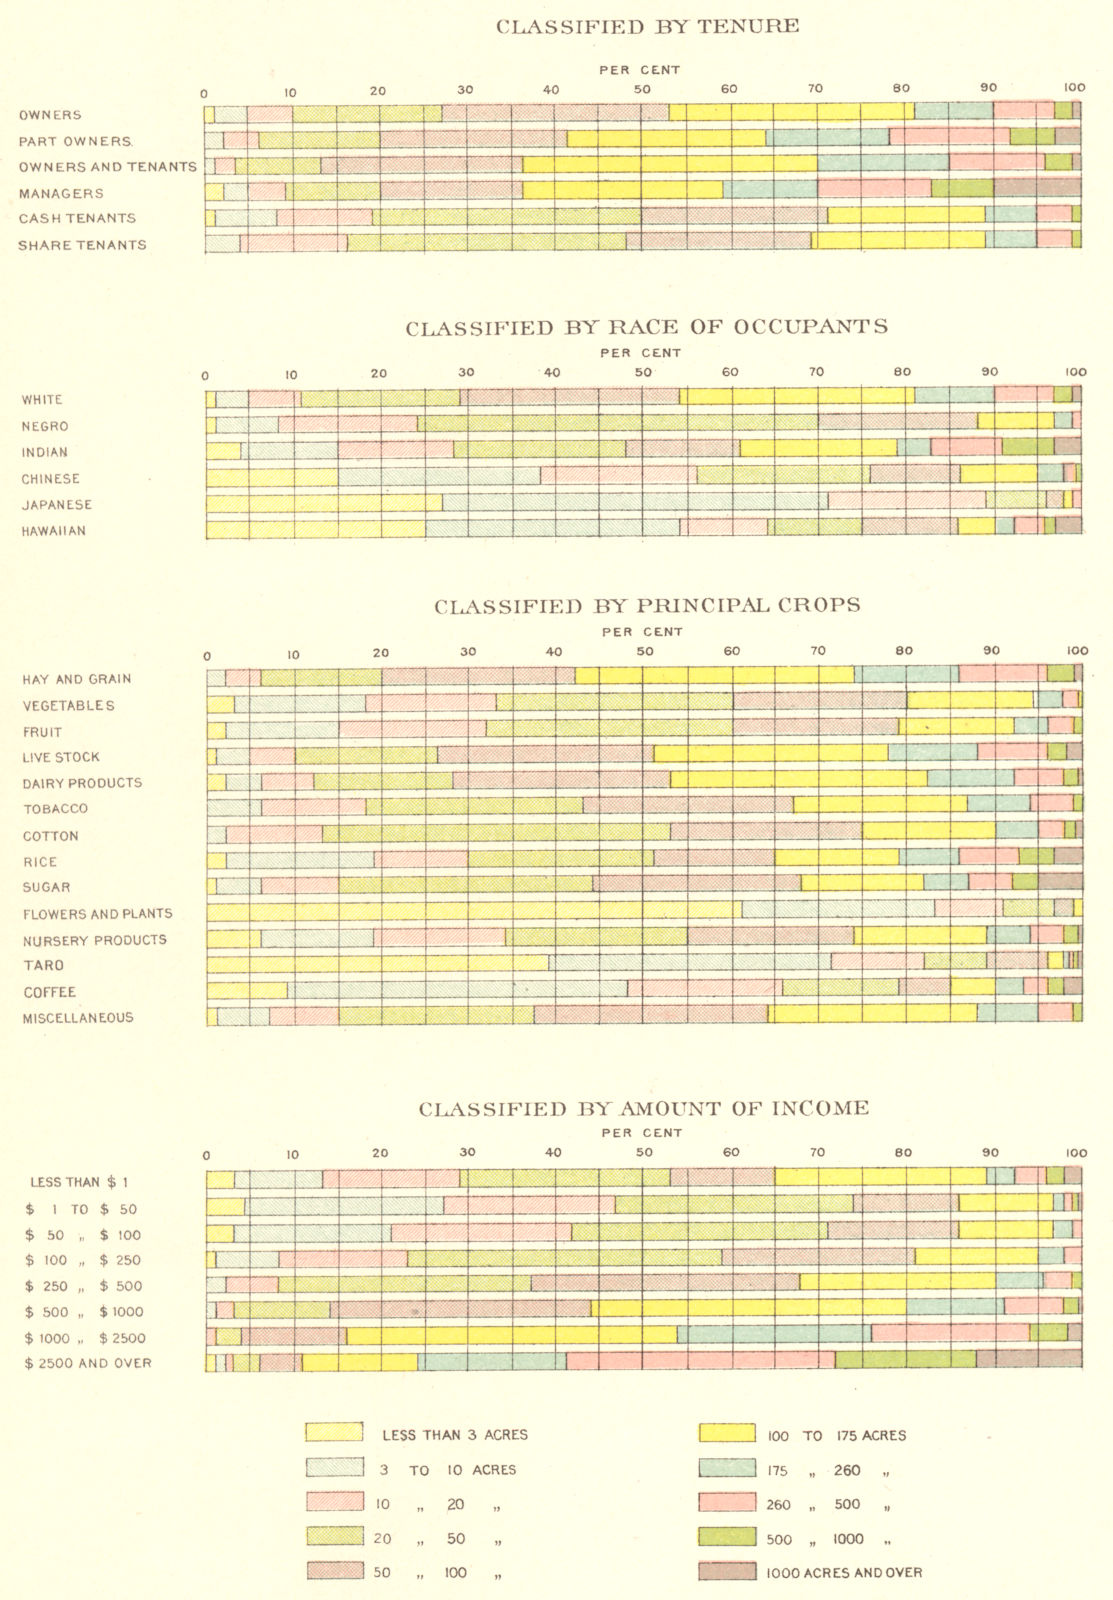 USA. Proportion of farms, area. ; tenure; race; crops; income 1900 old map